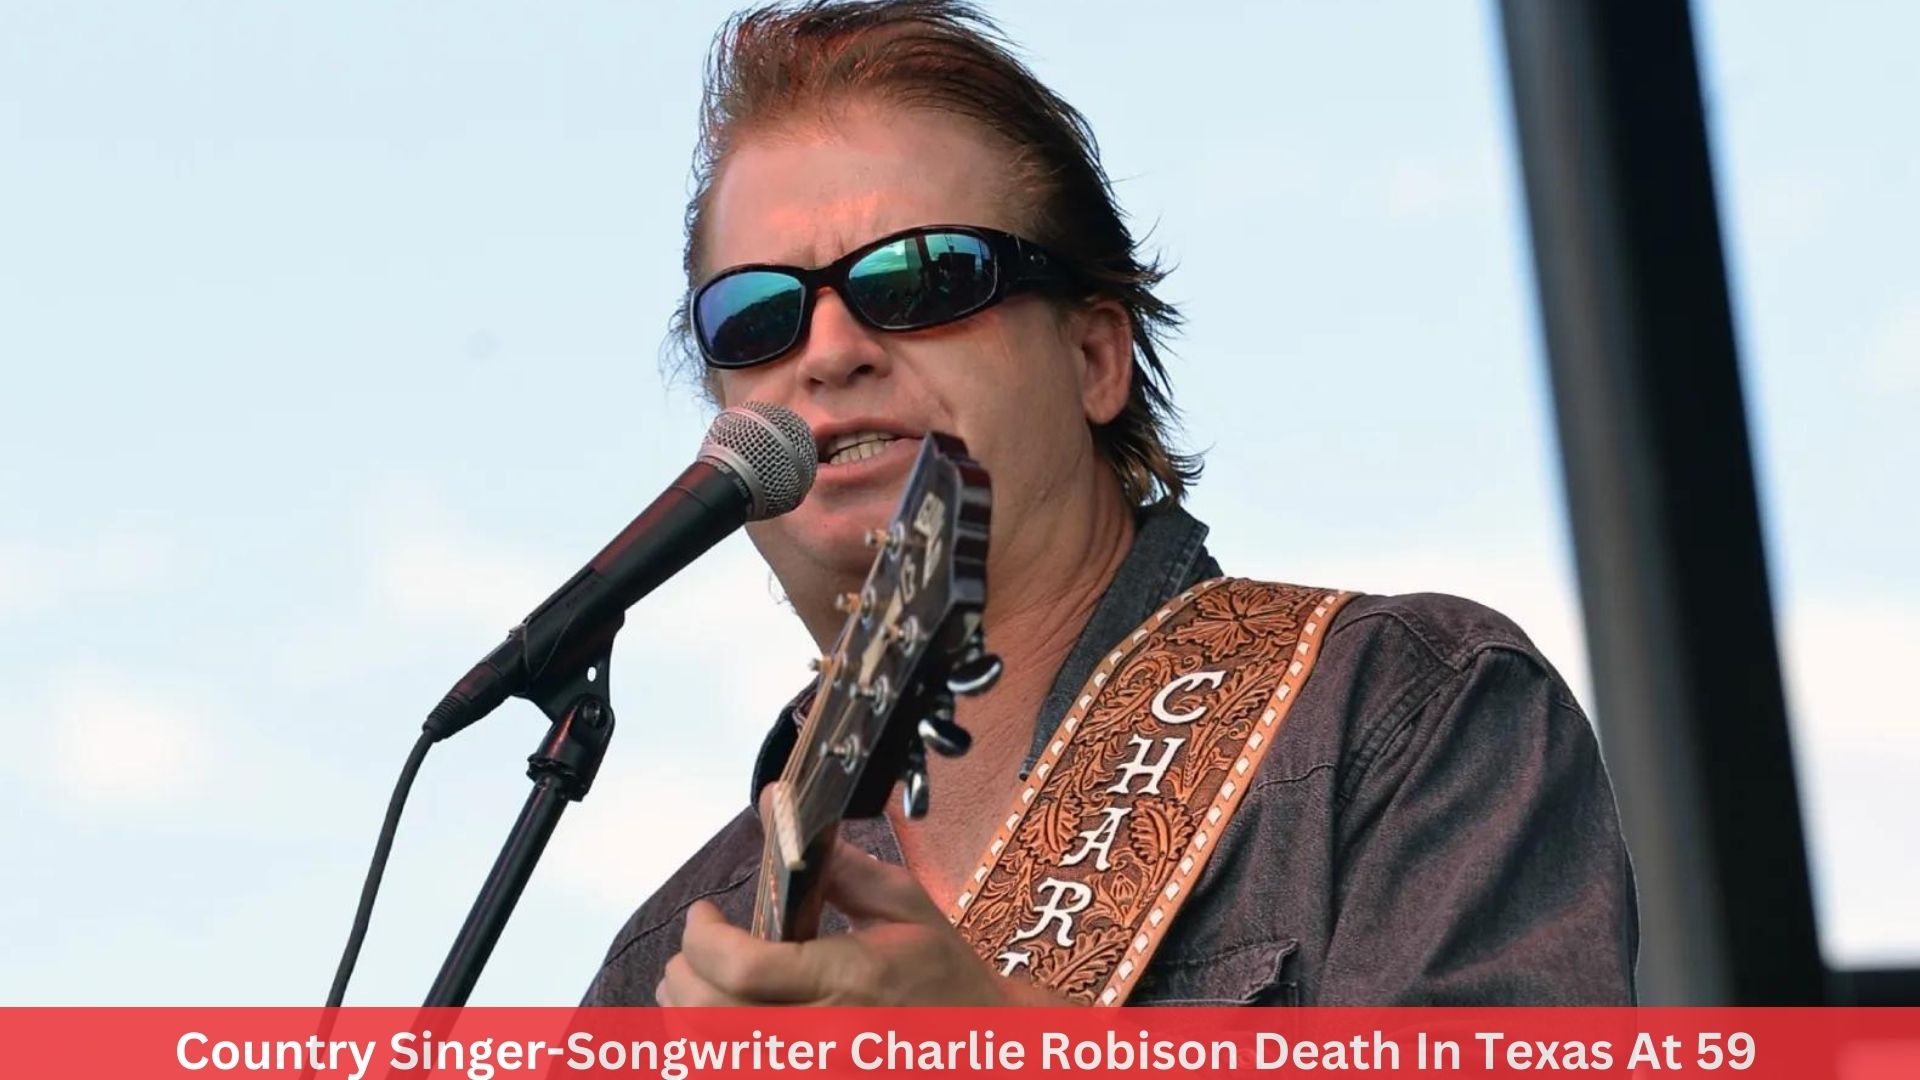 Country Singer-Songwriter Charlie Robison Death In Texas At 59